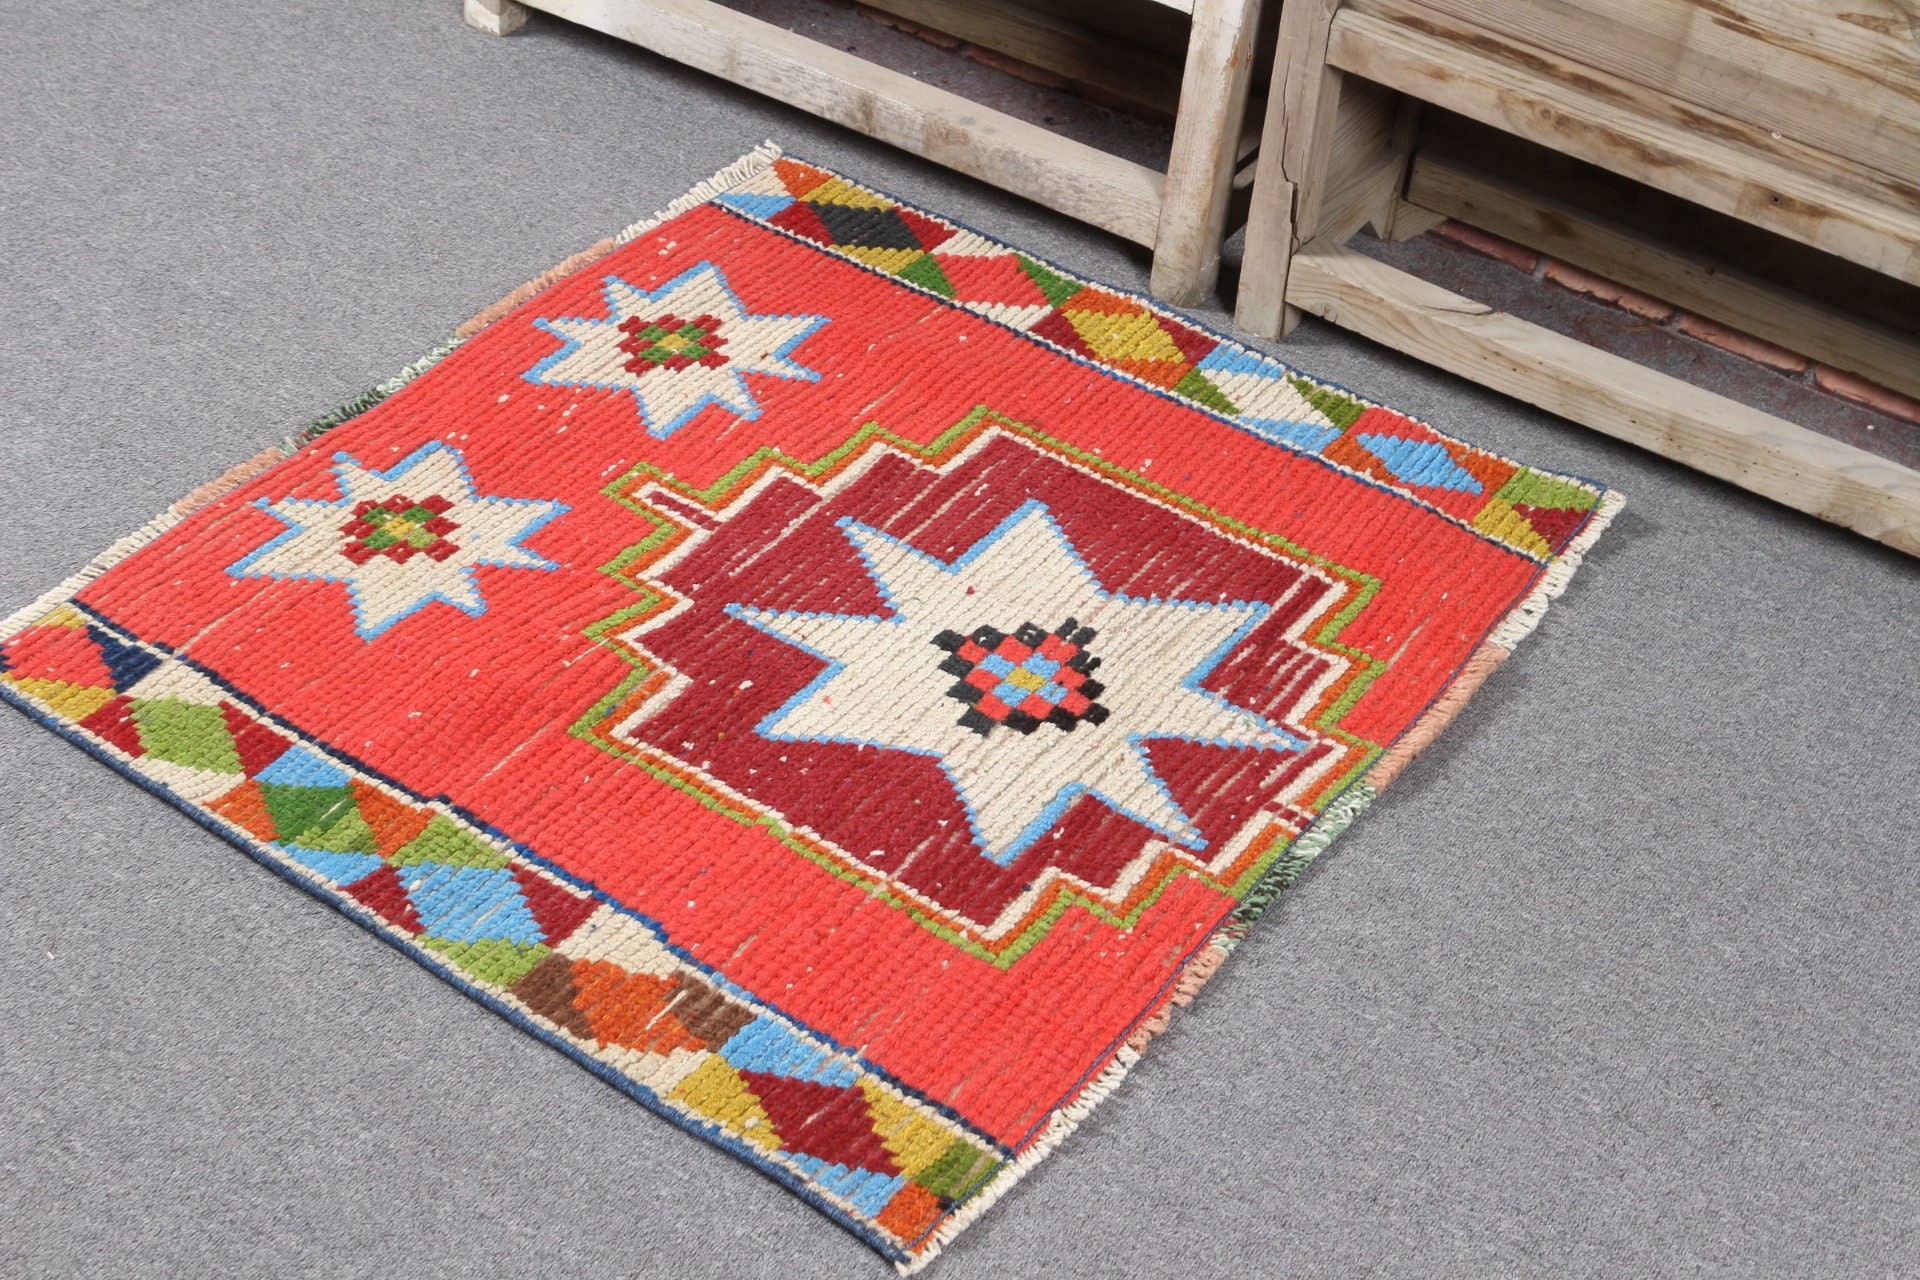 Entry Rug, Vintage Rug, Rugs for Kitchen, Antique Rug, Red  3.1x2.6 ft Small Rug, Turkish Rug, Nursery Rugs